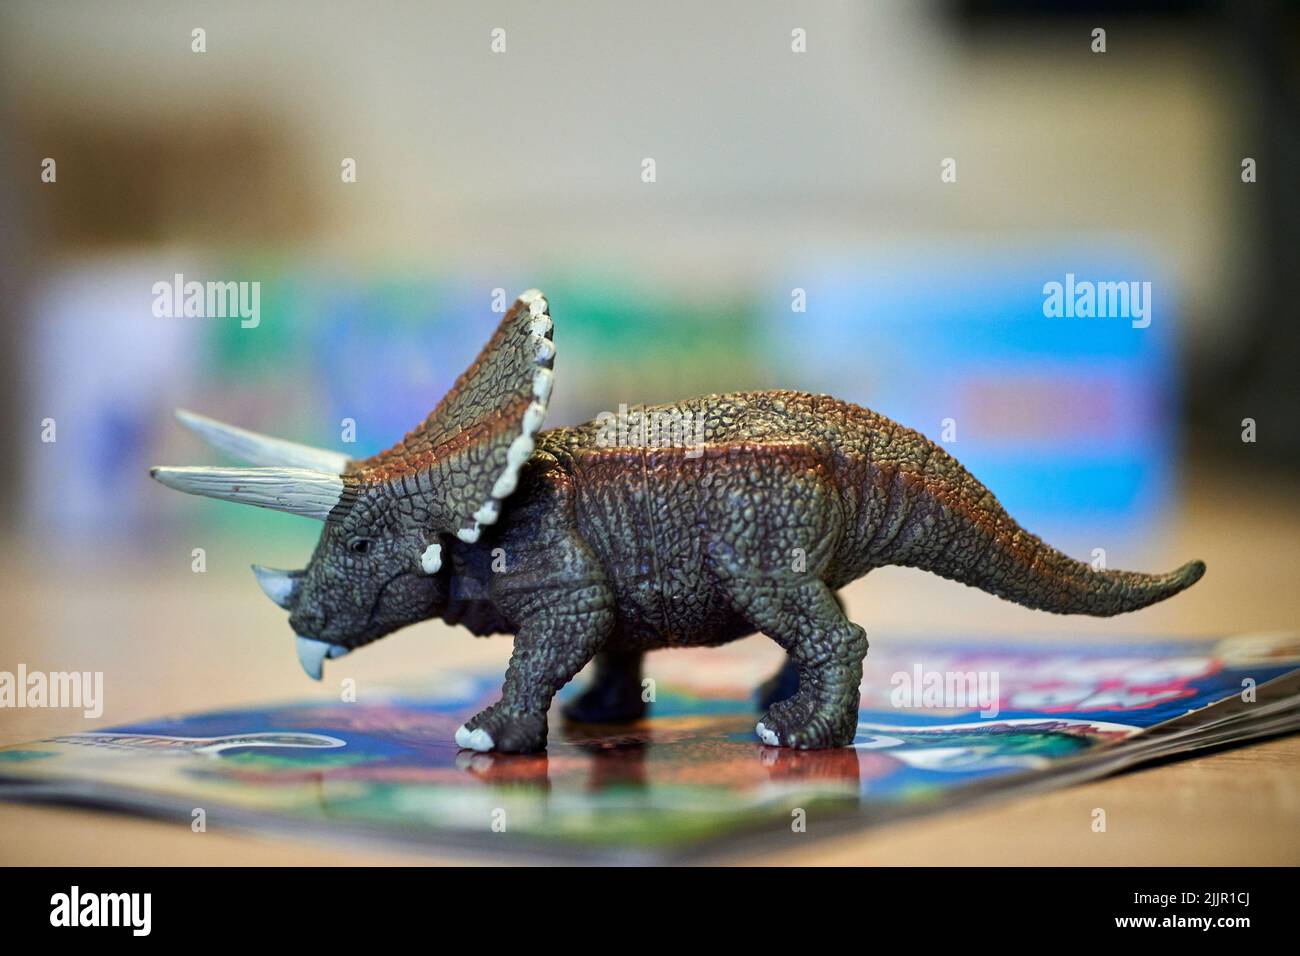 A plastic toy triceratops dinosaur figurine standing on a book on a table Stock Photo